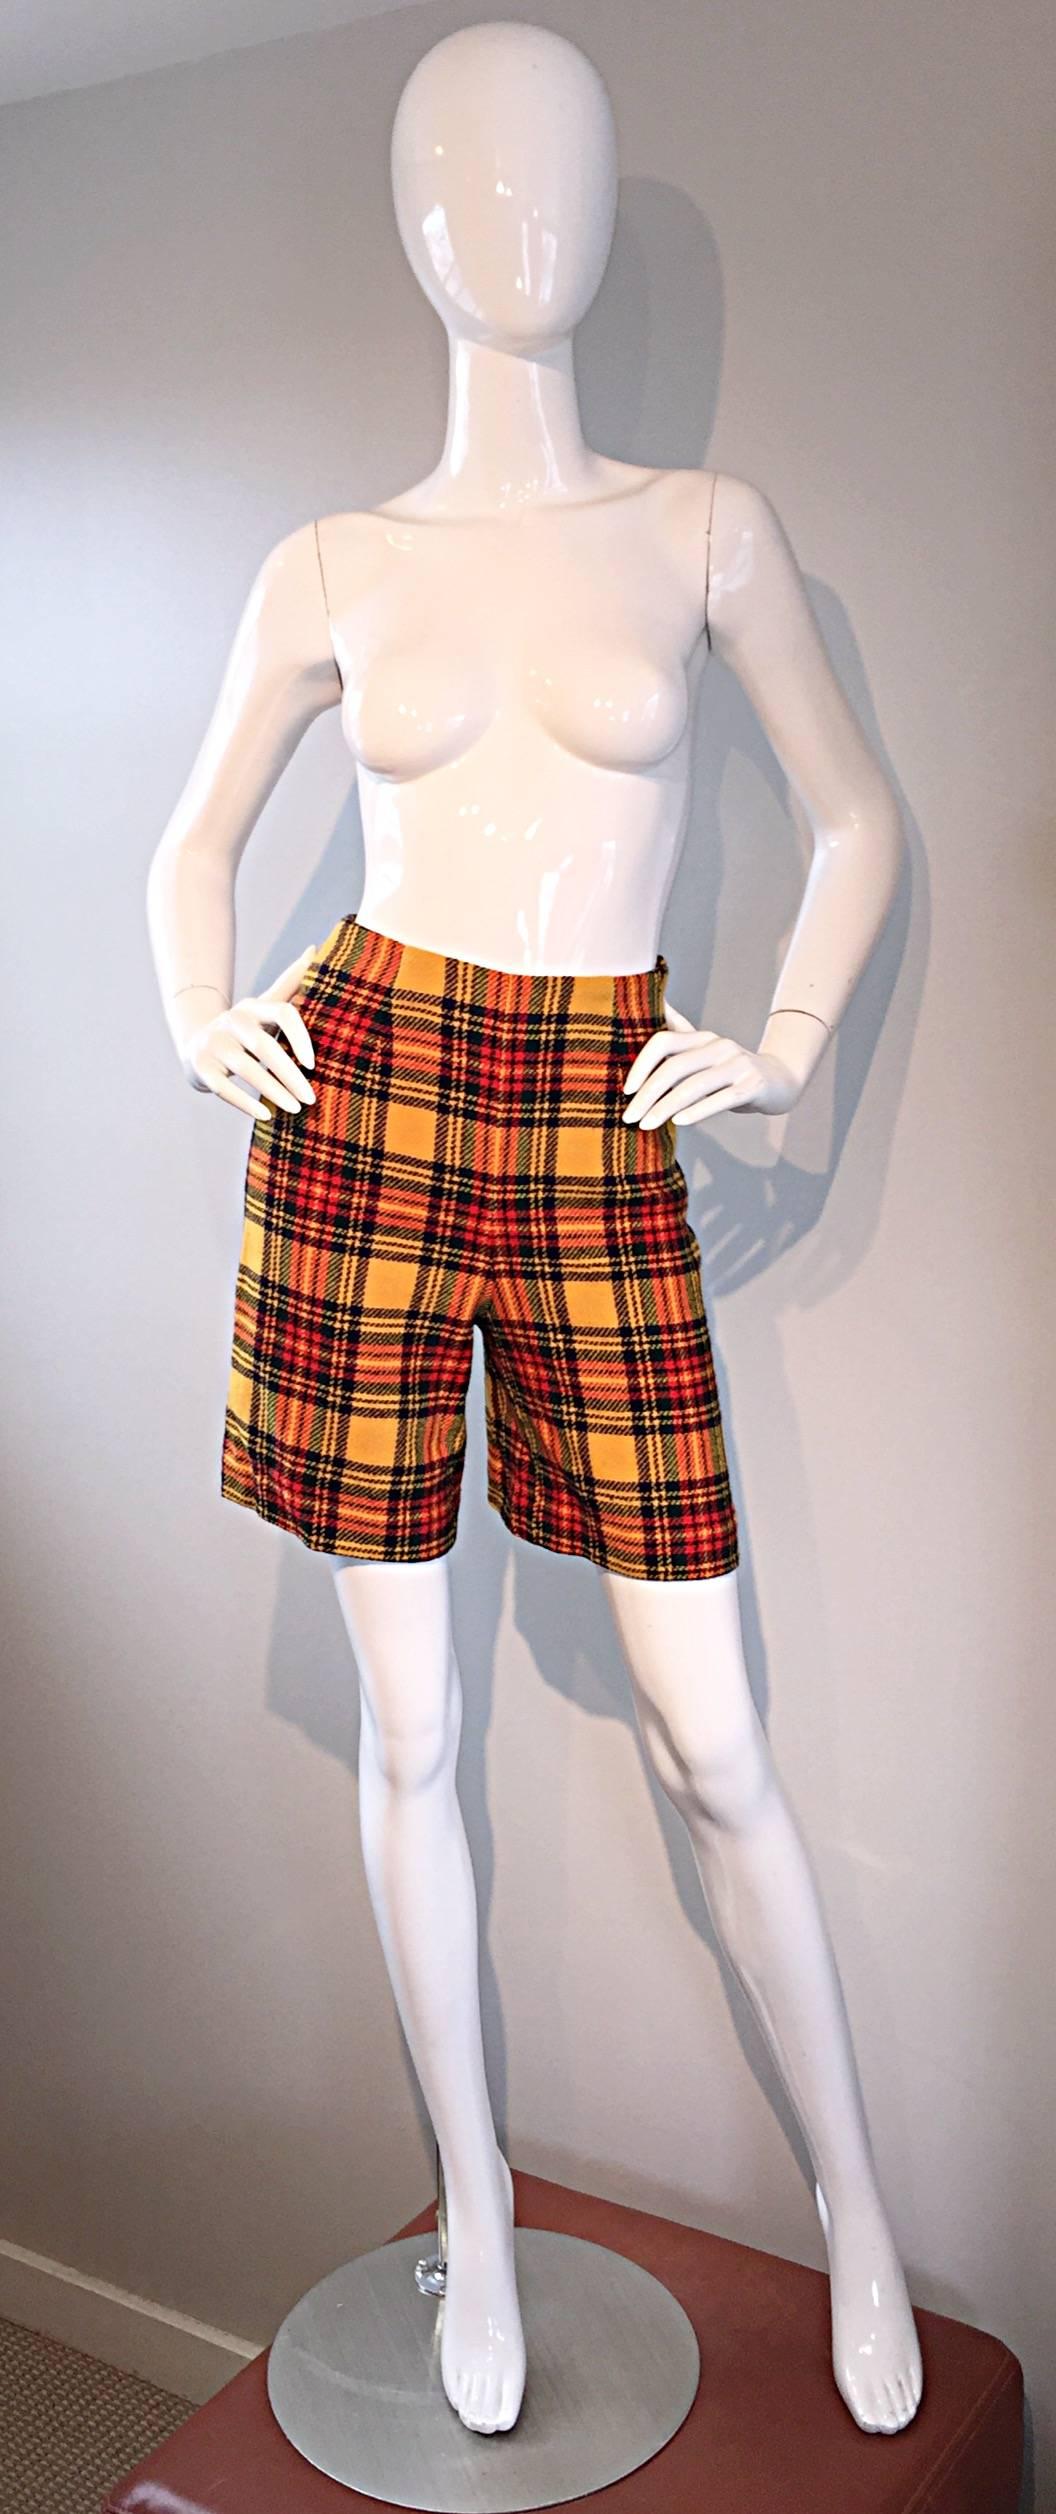 Awesome 1960s women’s high waisted tartan plaid shorts! Features a vibrant plaid of yellow, red, and dark green. Metal zipper up the side. Great fit, that looks good with or without stockings. Chic with a tucked in turtleneck and boots, yet perfect